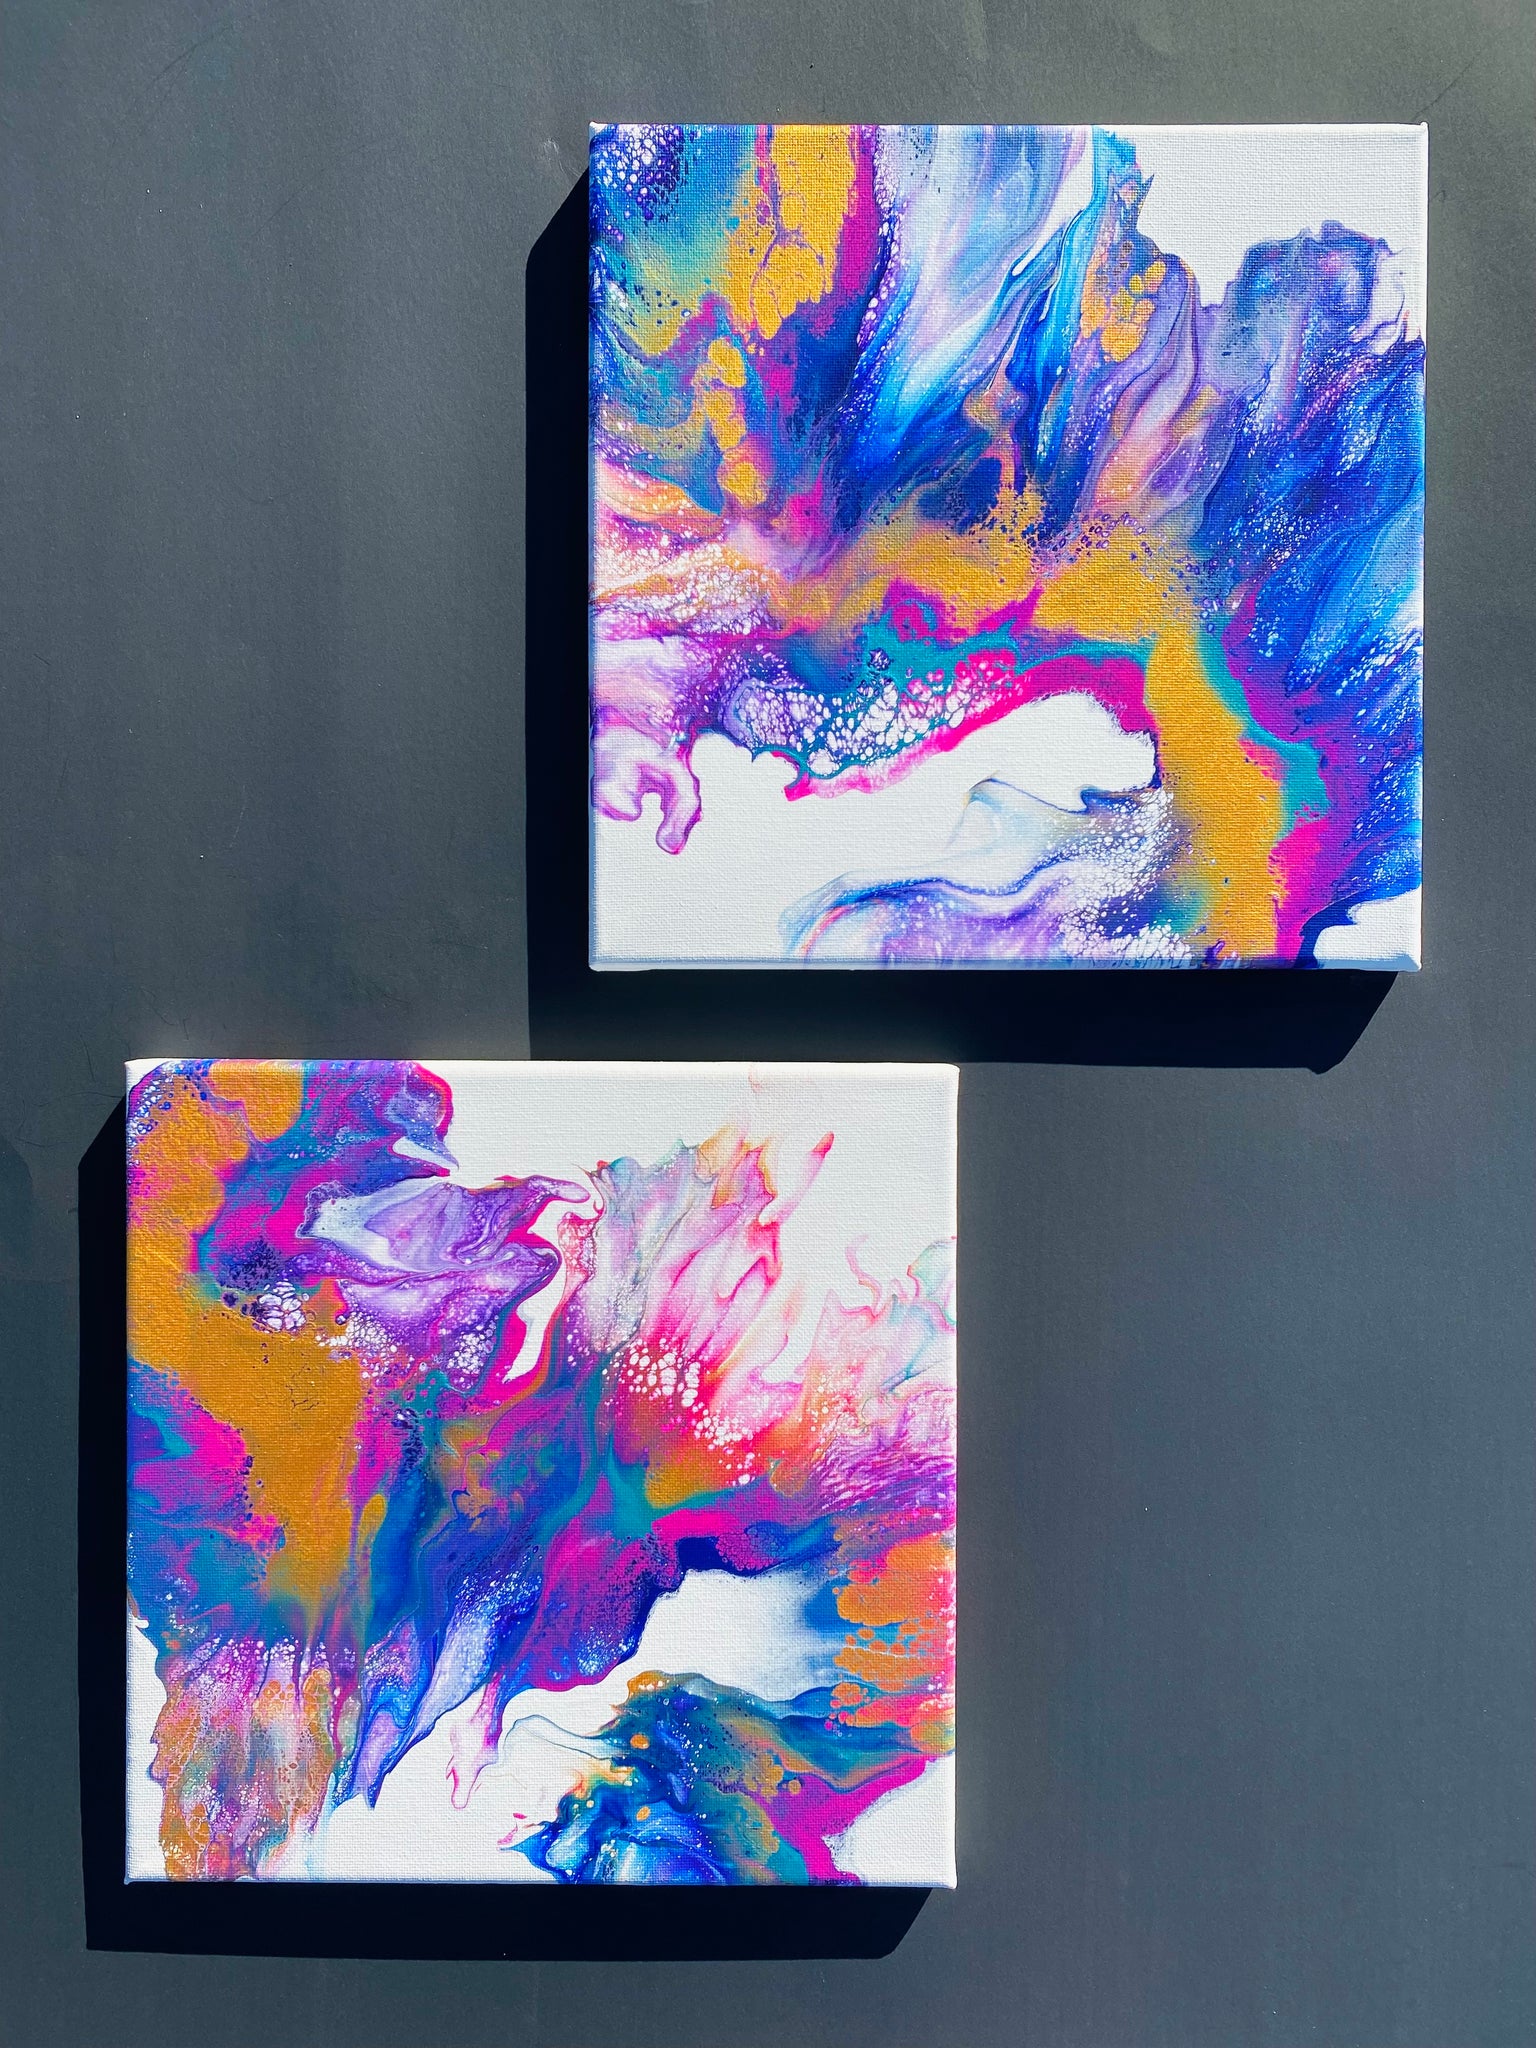 Ocean Inspired | Original Art Acrylic Painting, diptych painting set by Norma Abou-Rizk